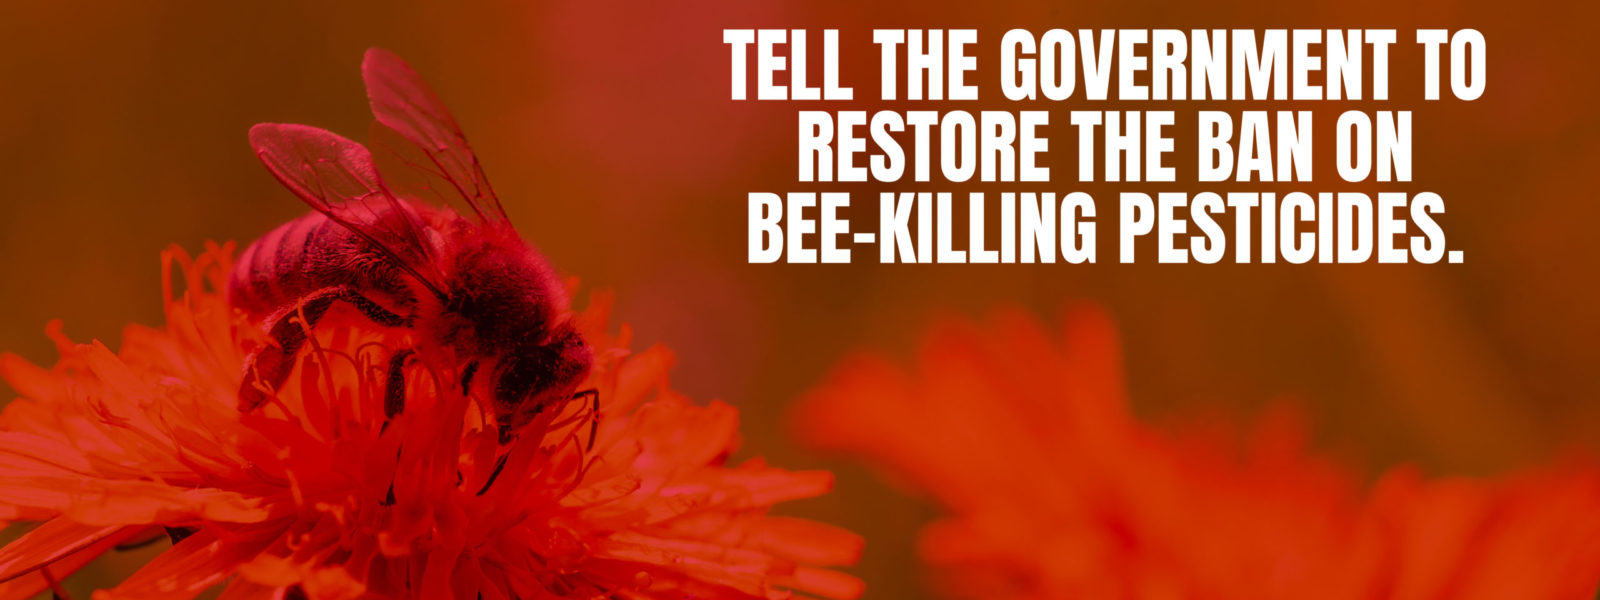 Tell the Government to restore the ban on bee-killing pesticides